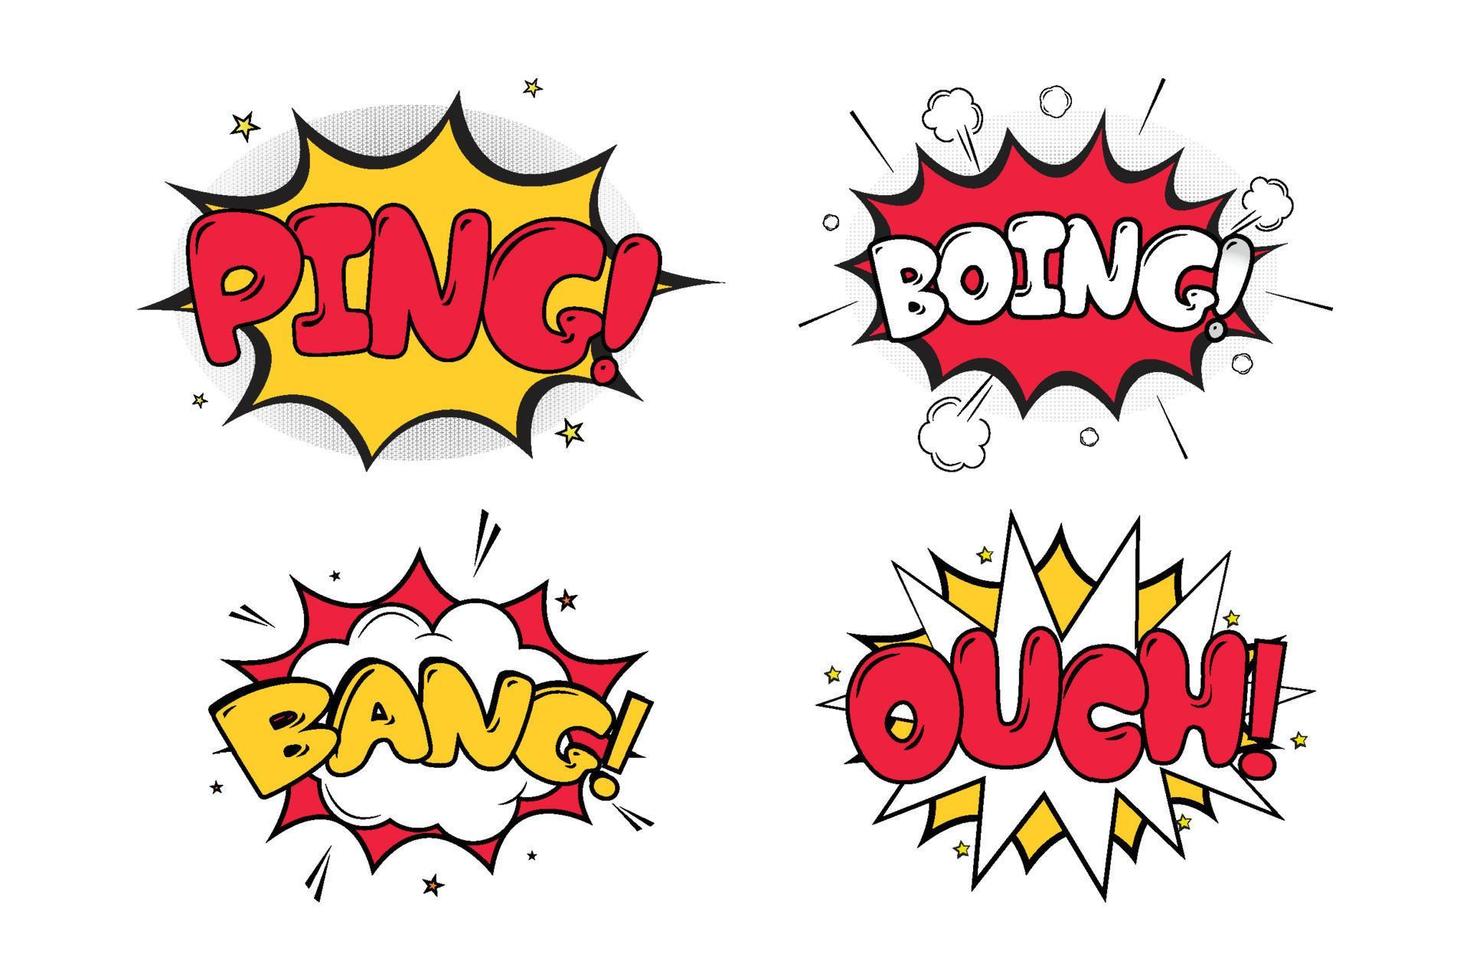 Ping Boing comic blast with white, red, and yellow colors. Ouch Bang comic explosion with yellow, white, and red colors. Comic burst with colorful clouds. Text bubbles for cartoon speeches. vector